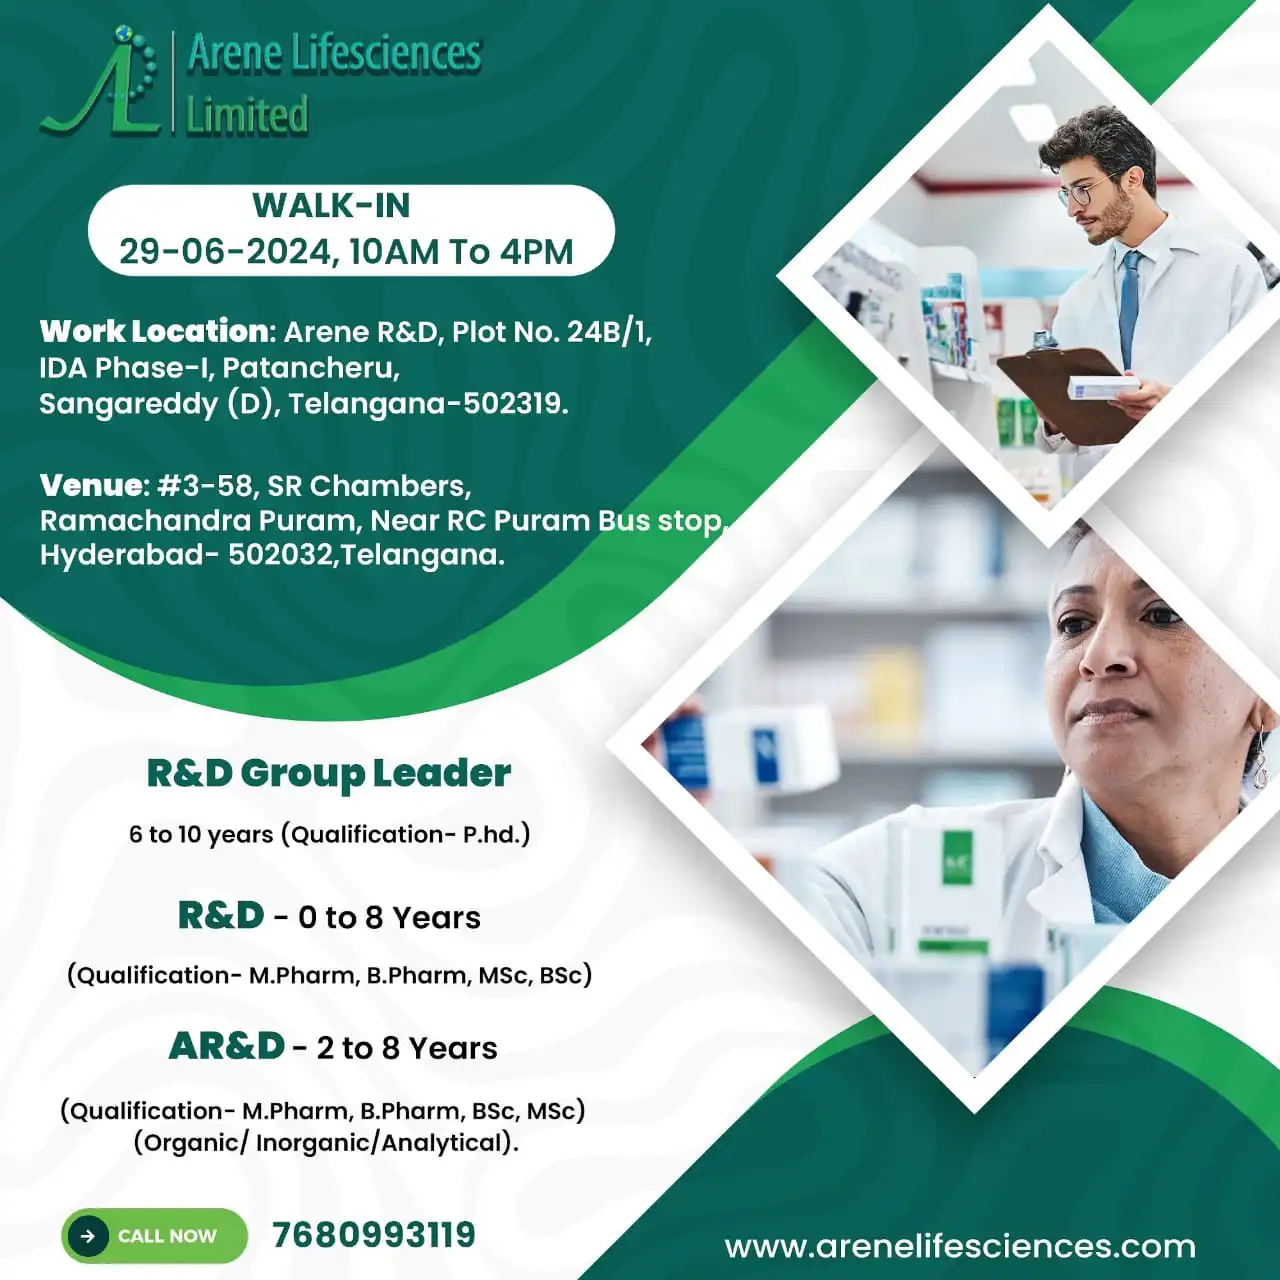 Walk-In Interview at Arene Lifesciences Limited on 29th June 2024